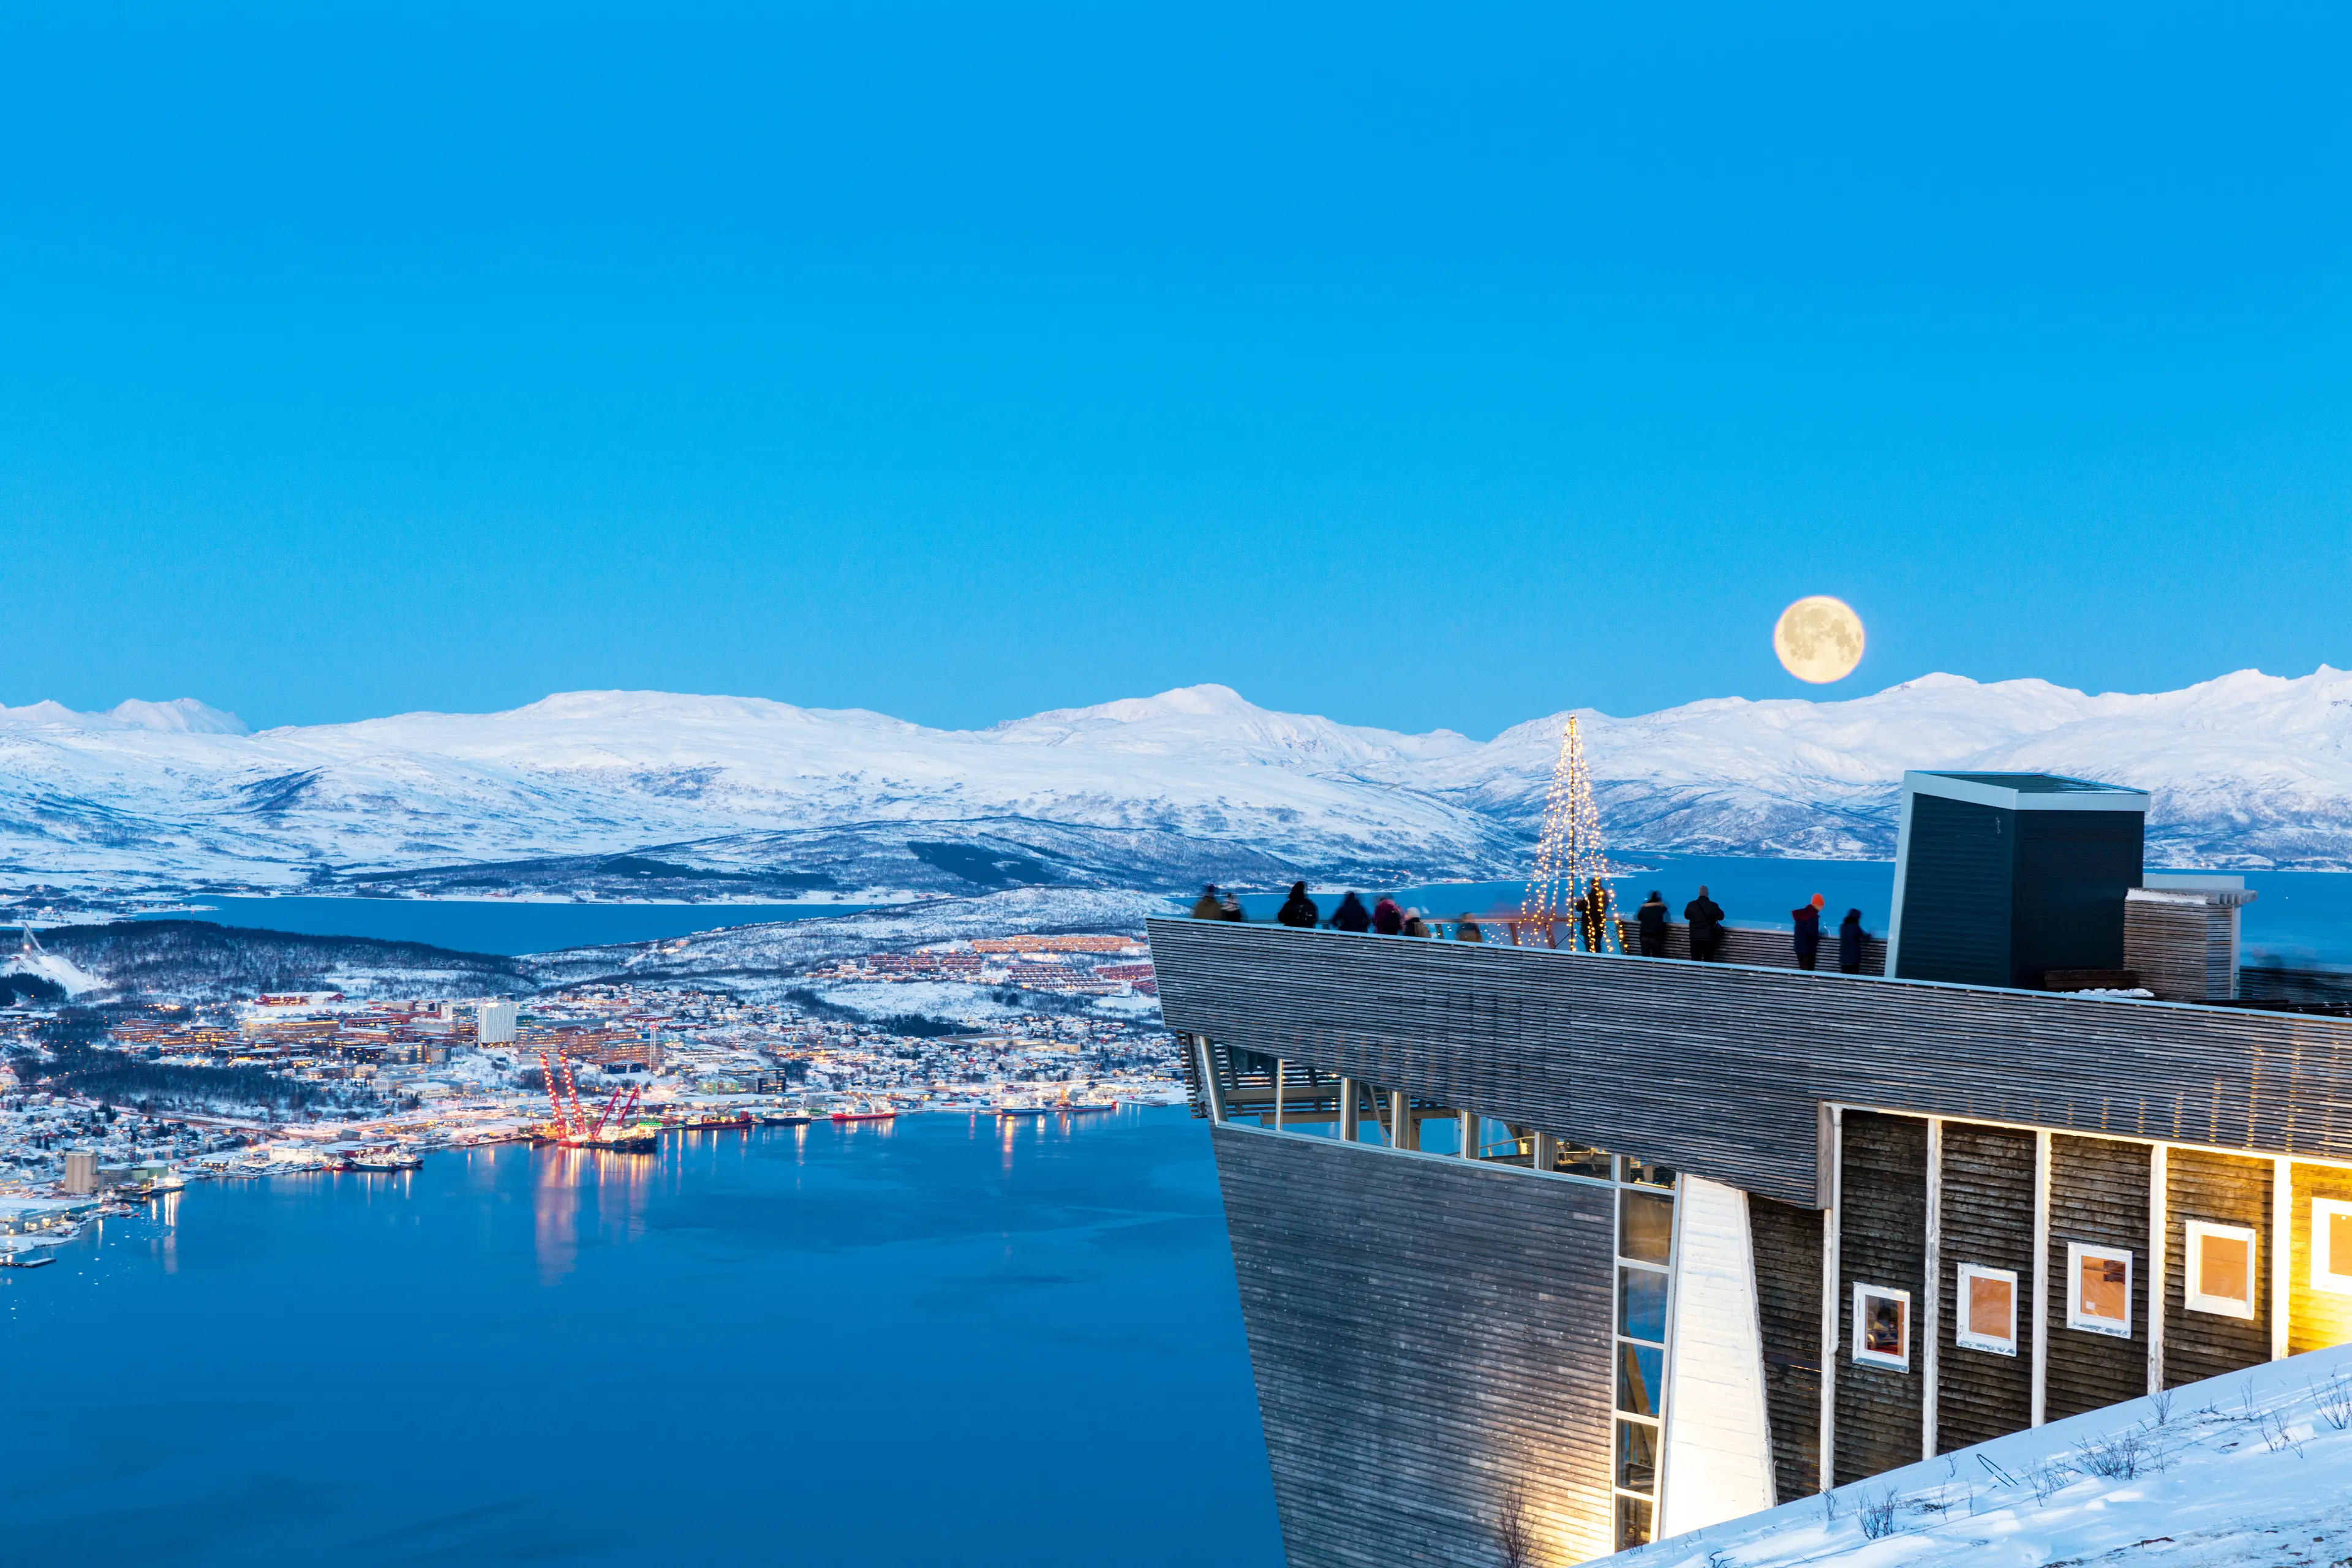 3-Day Exclusive Norway: Undiscovered Sights and Vibrant Nightlife